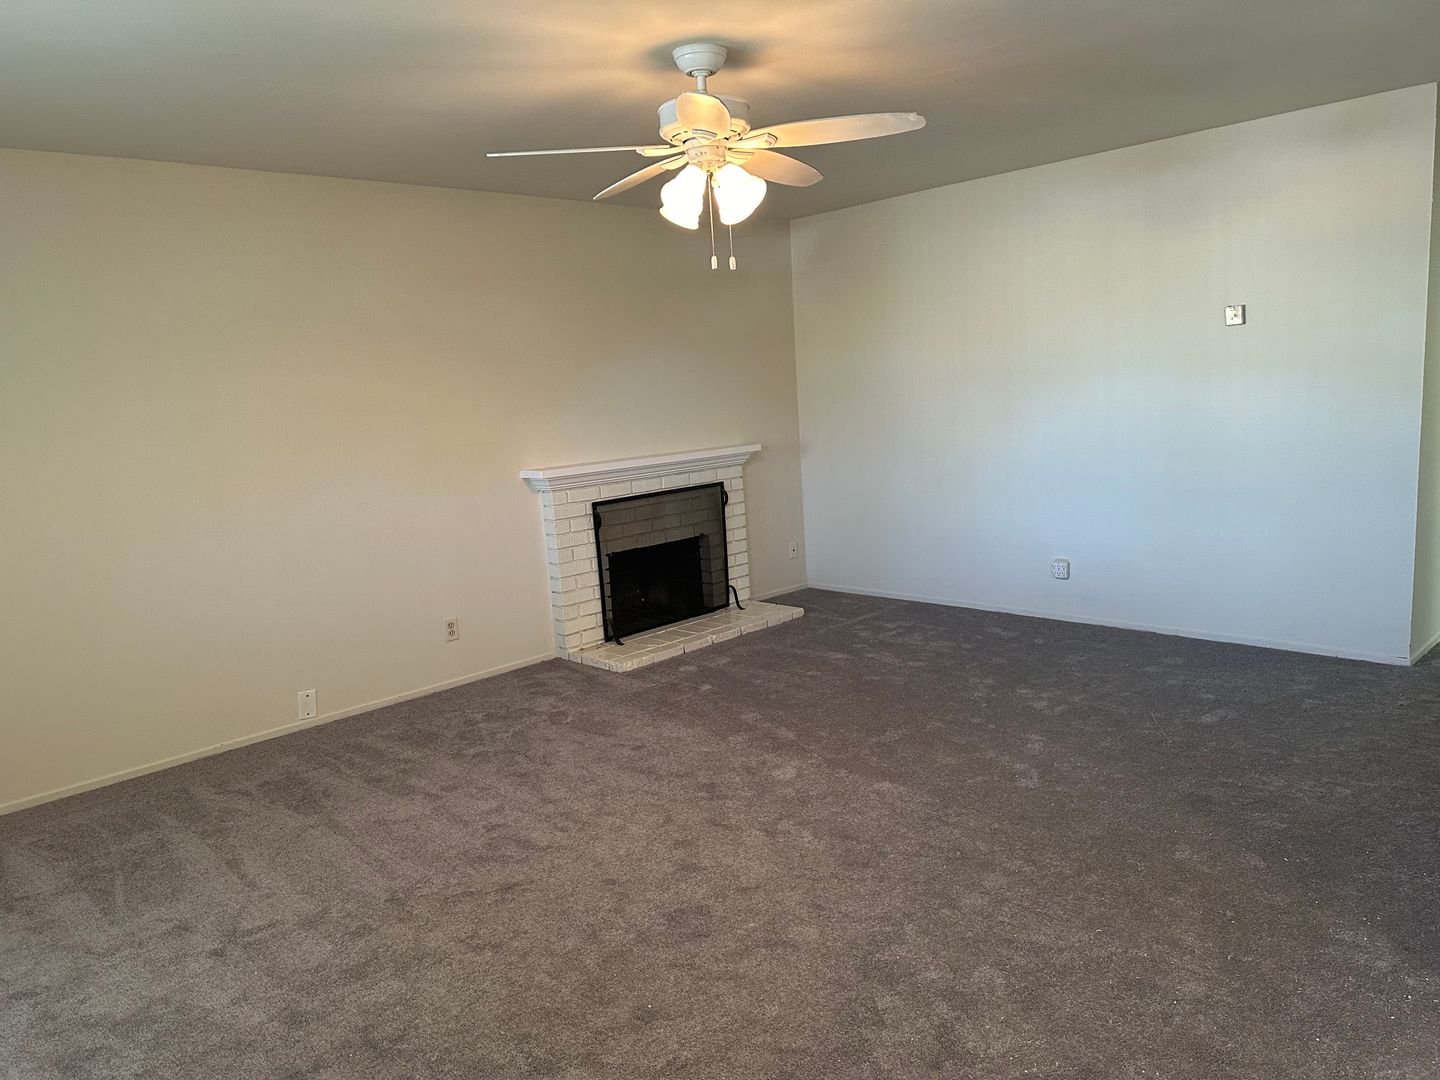 Single level 3 bedroom house in Campbell